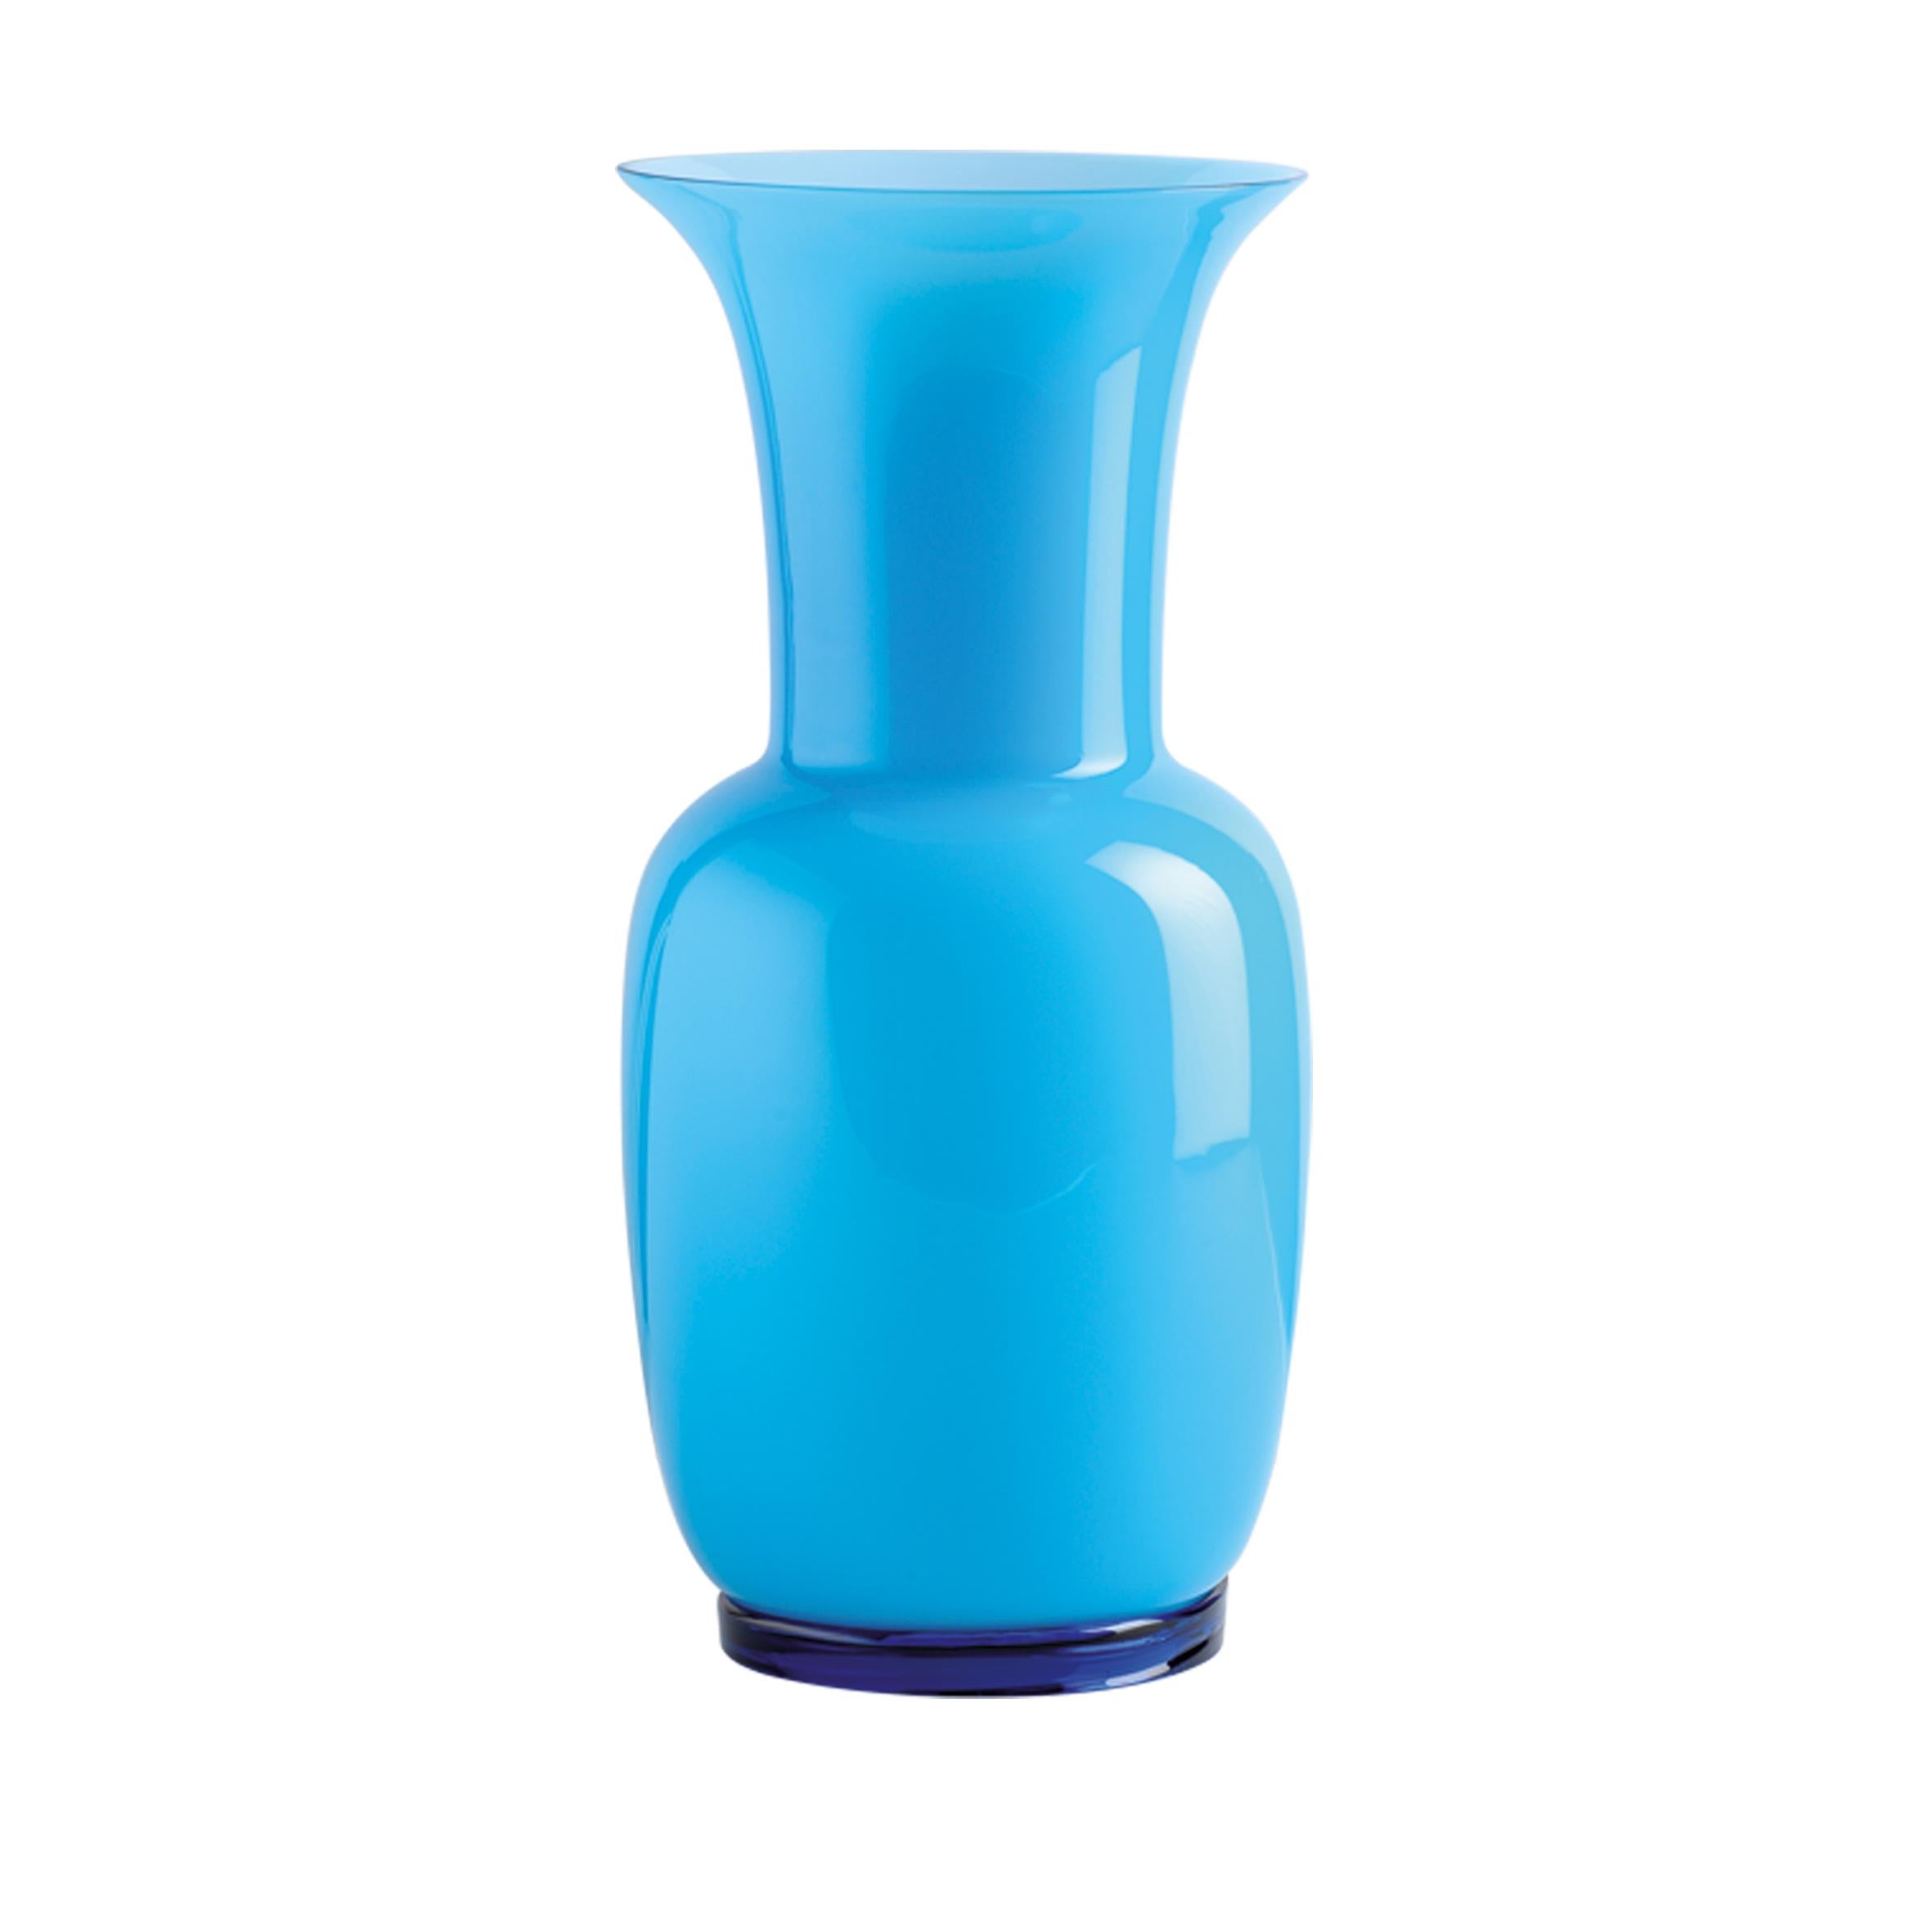 Venini glass vase with slim, oval shaped body and funnel shaped neck. Featured in aquamarine colored glass. Perfect for indoor home decor as container or strong statement piece for any room.

Dimensions: 17 cm diameter x 36 cm height.